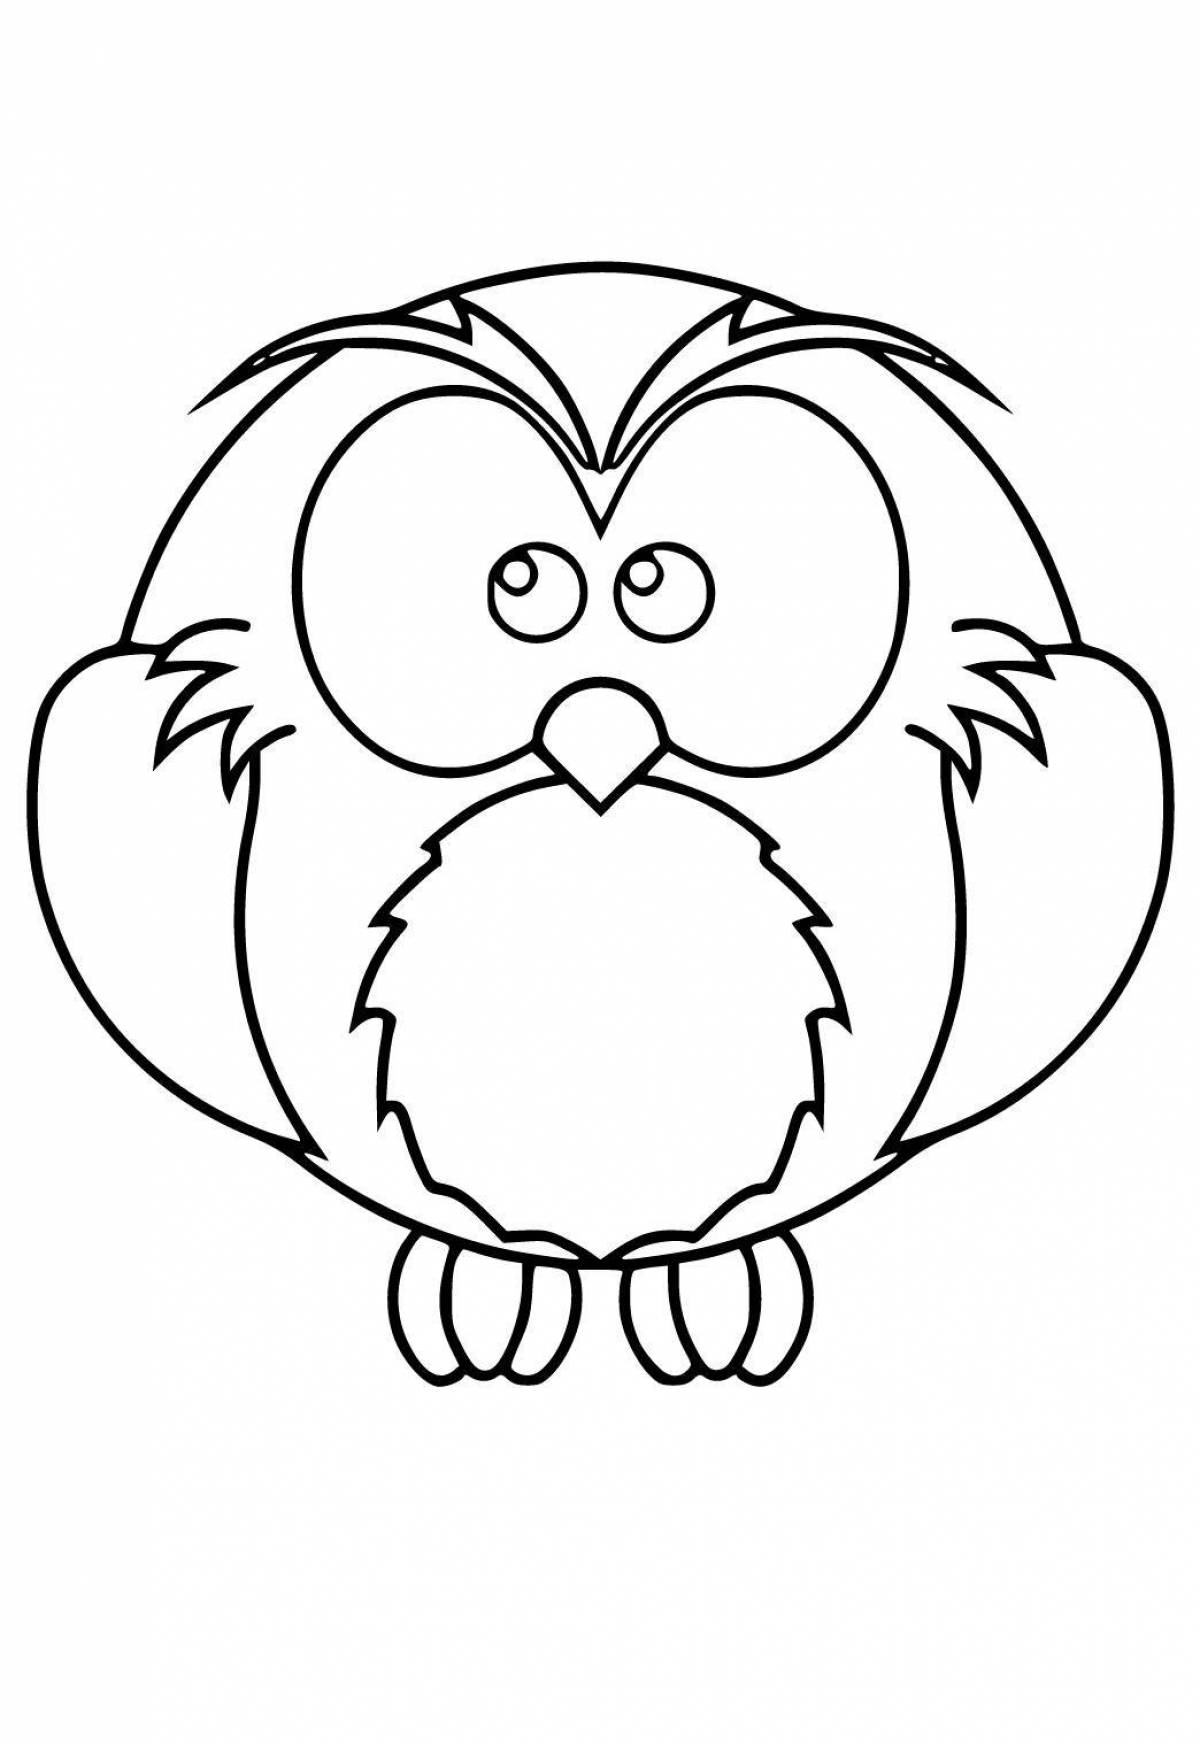 Joyful owl coloring for children 3-4 years old